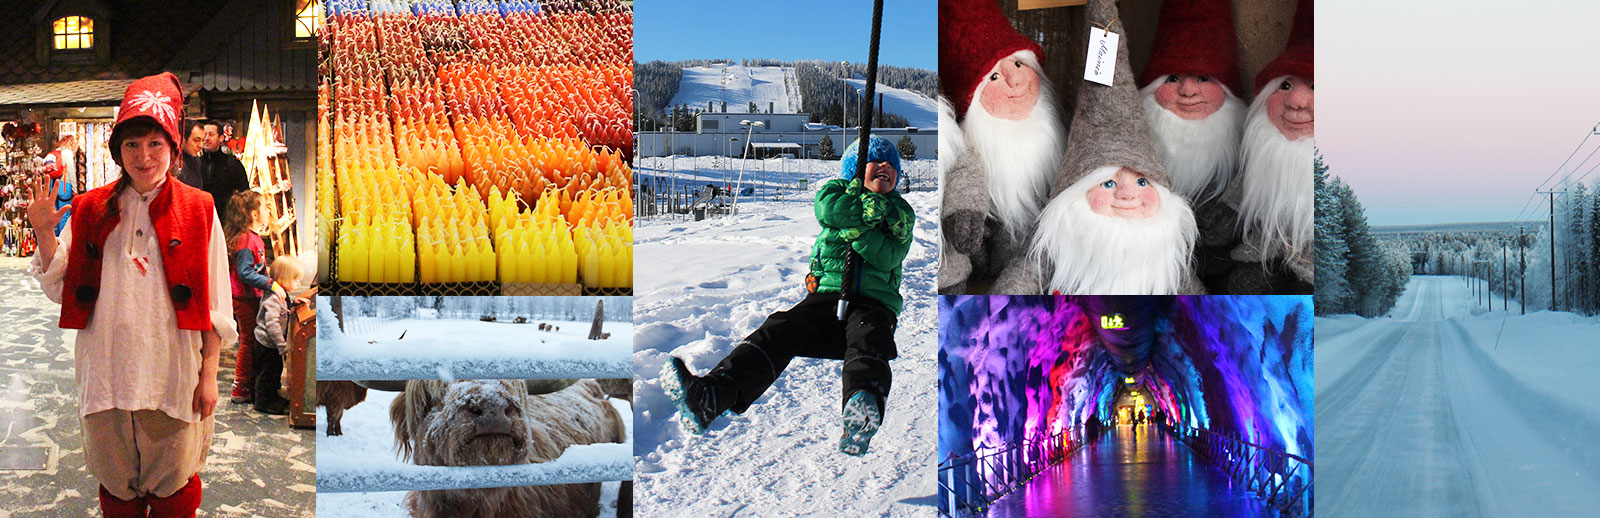 Fun things to do in Finland on Christmas holiday